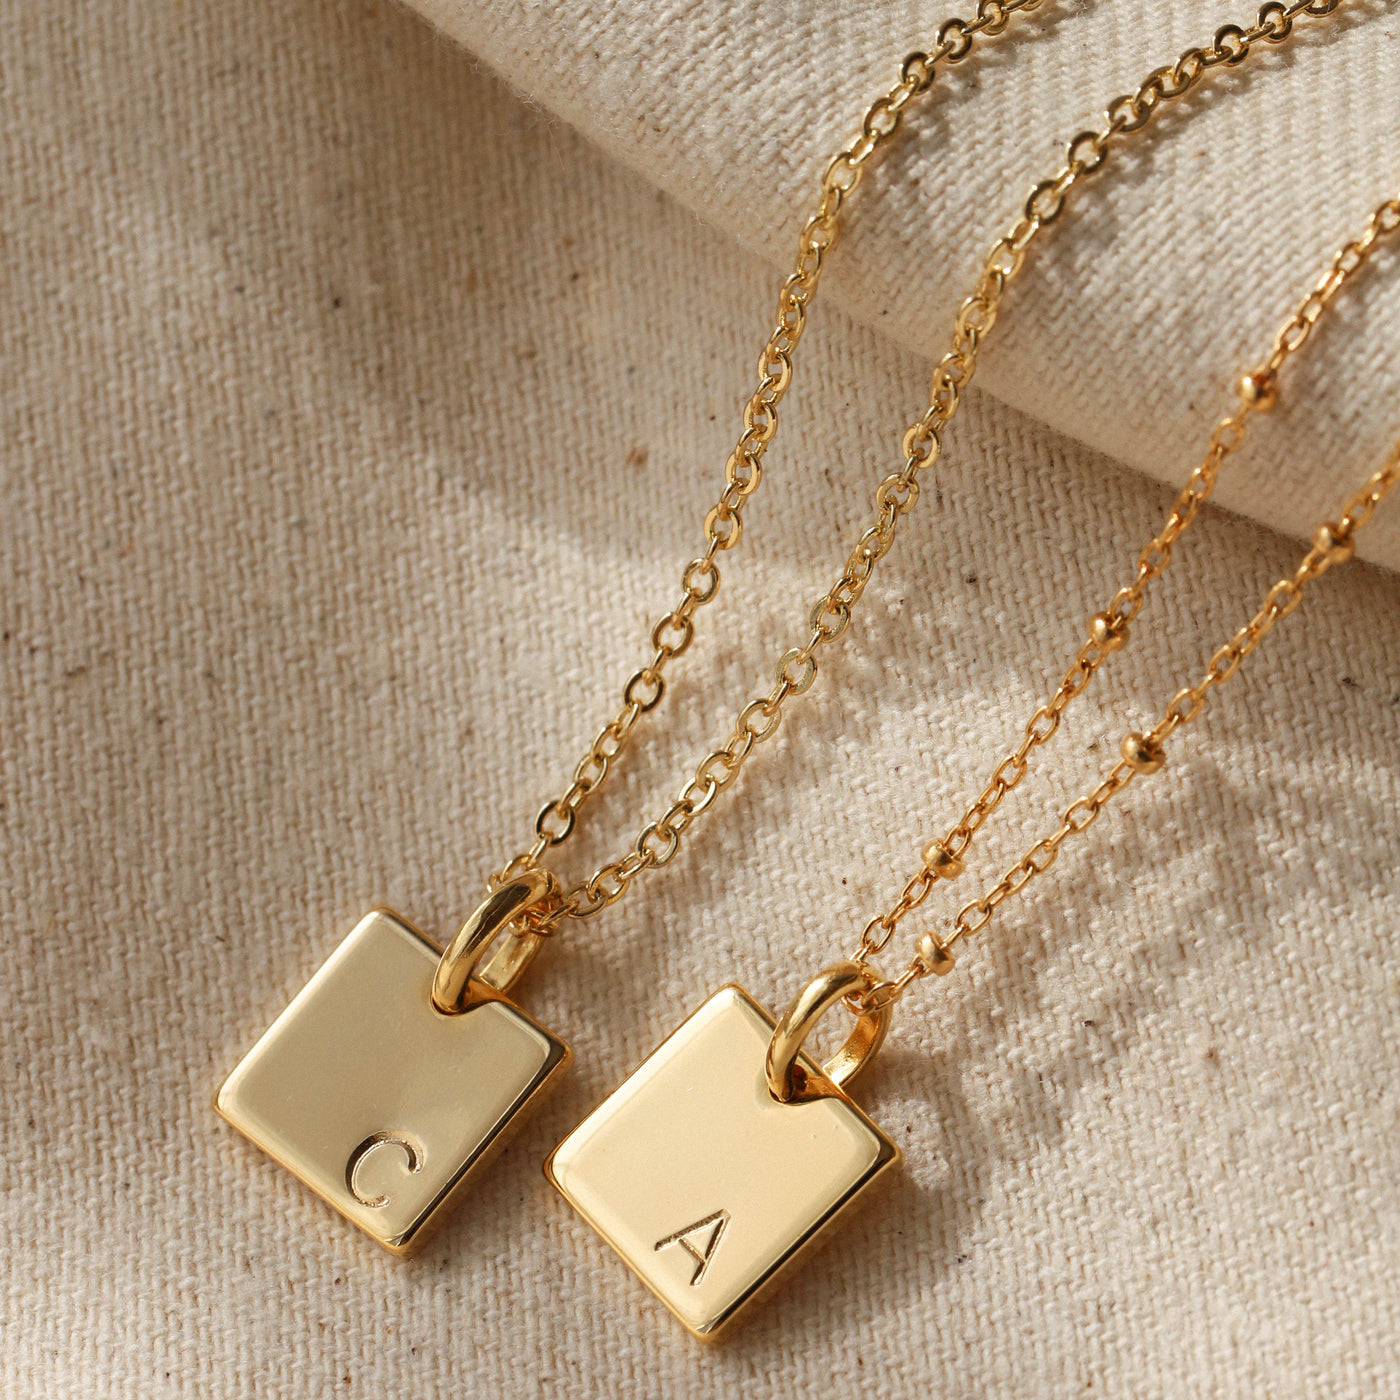 Gold personalized coin necklaces